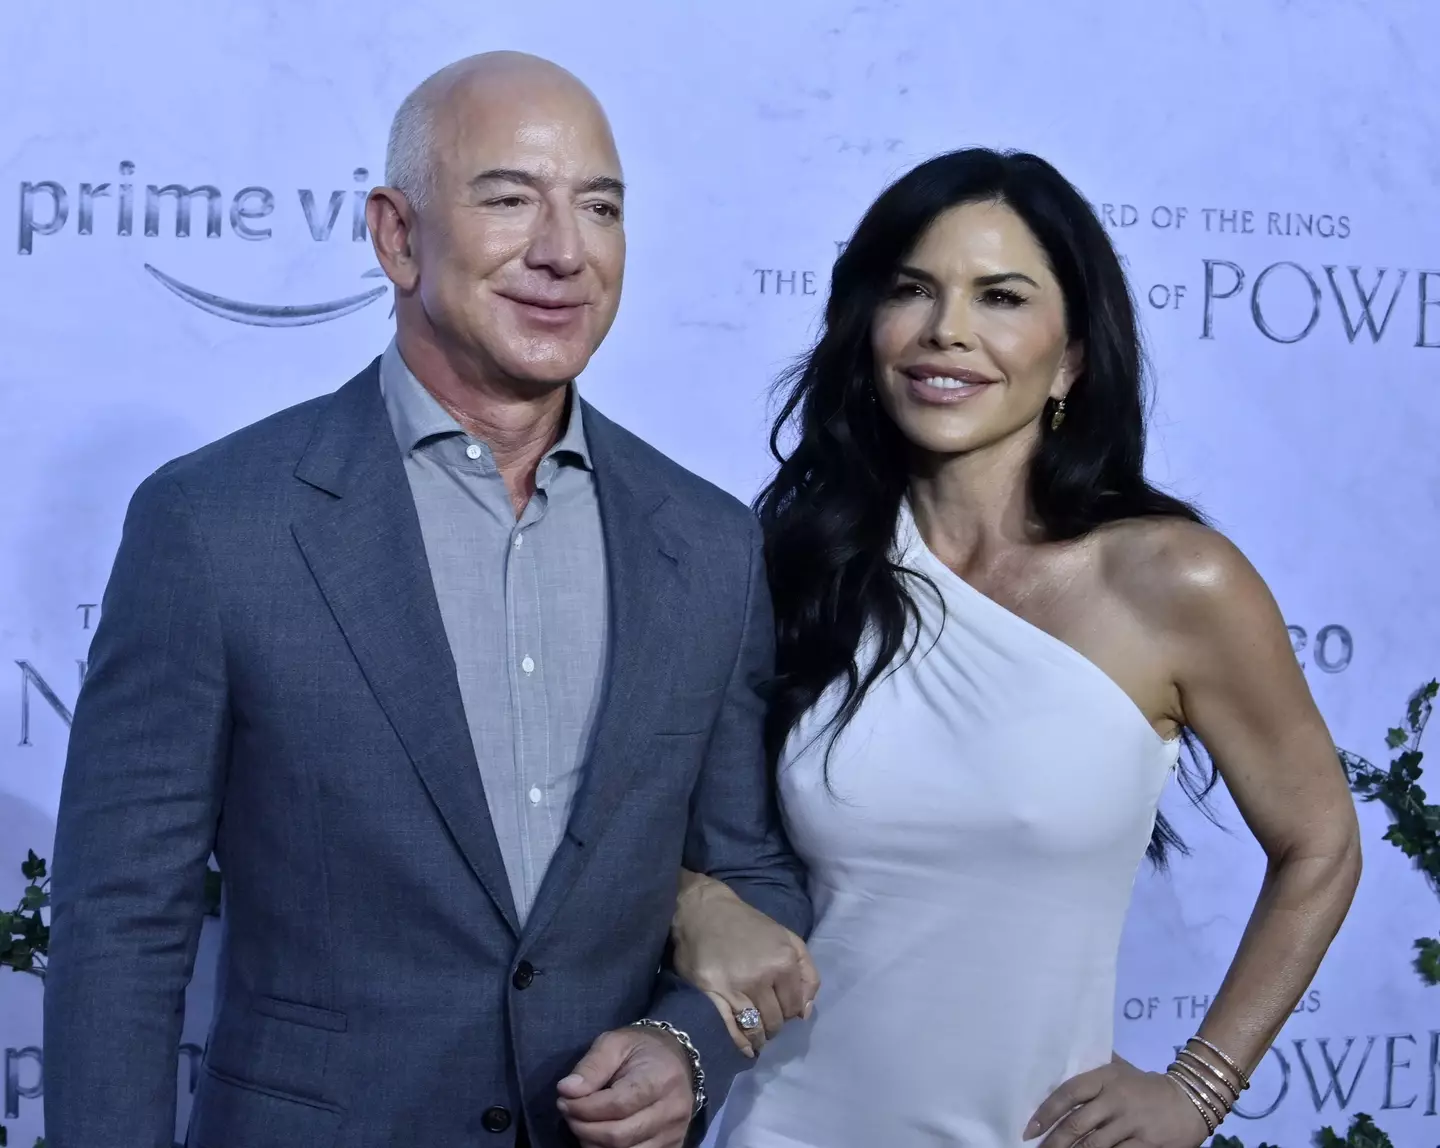 Jeff Bezos with his girlfriend Laura Sanchez at Prime Video's Rings of Power premiere.